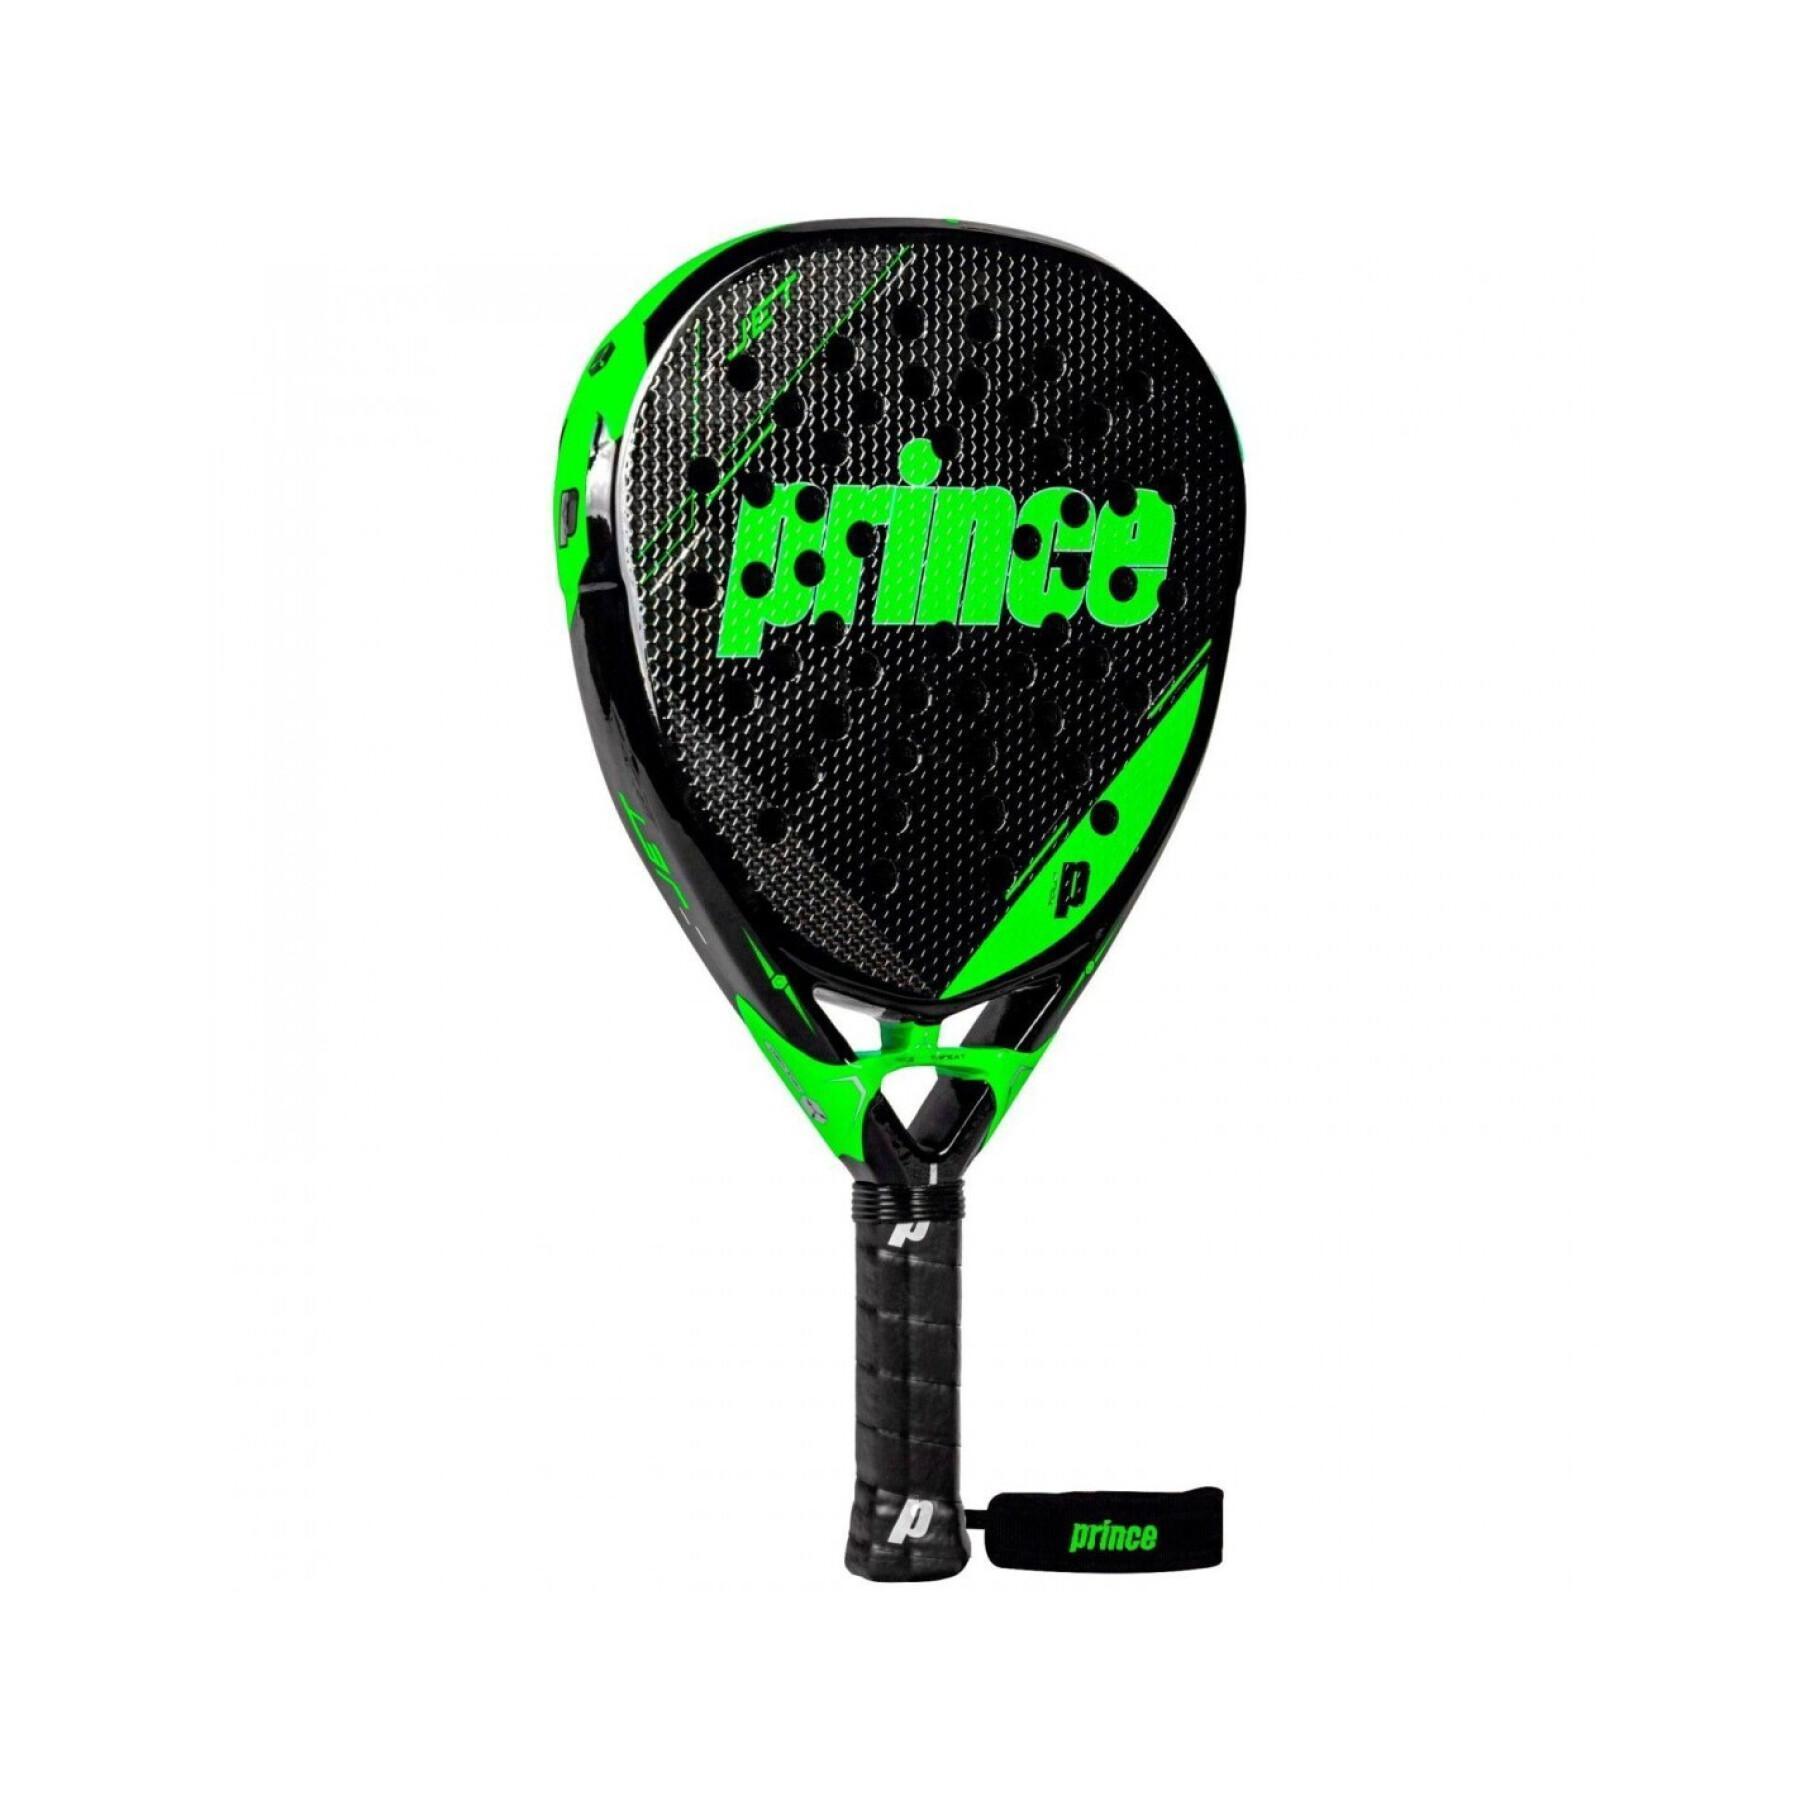 Racket from padel Prince Jet